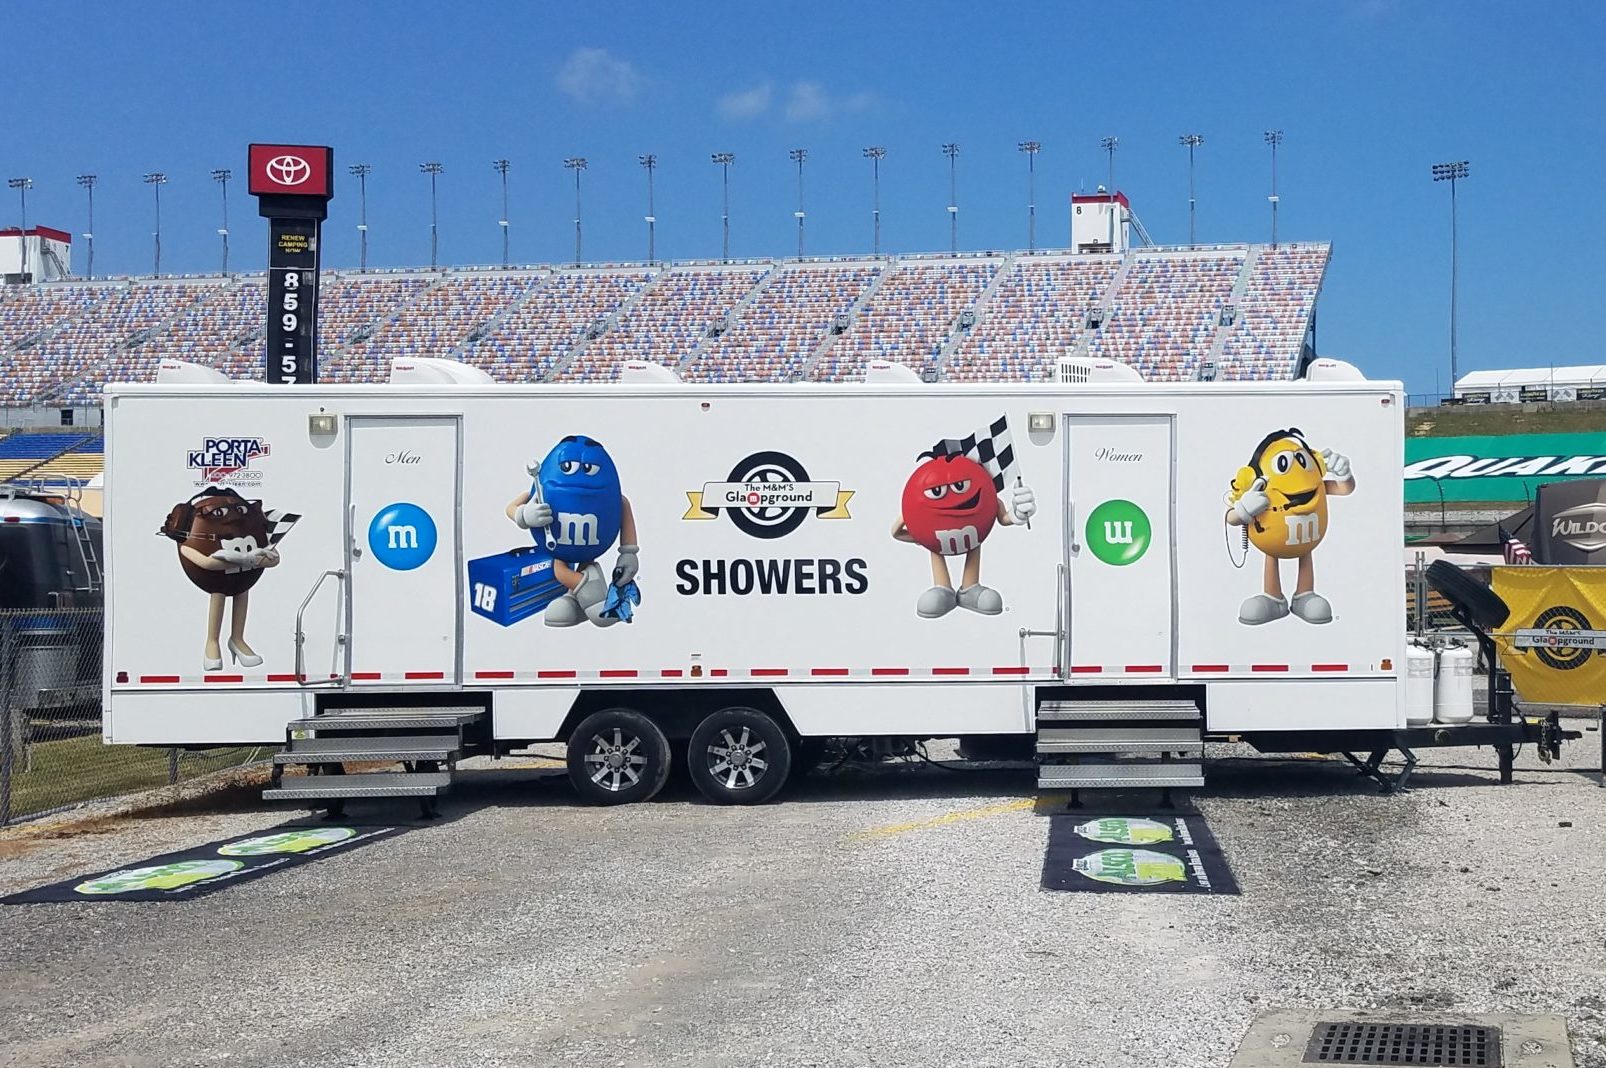 M&M'S Glampground bathroom and shower trailer.